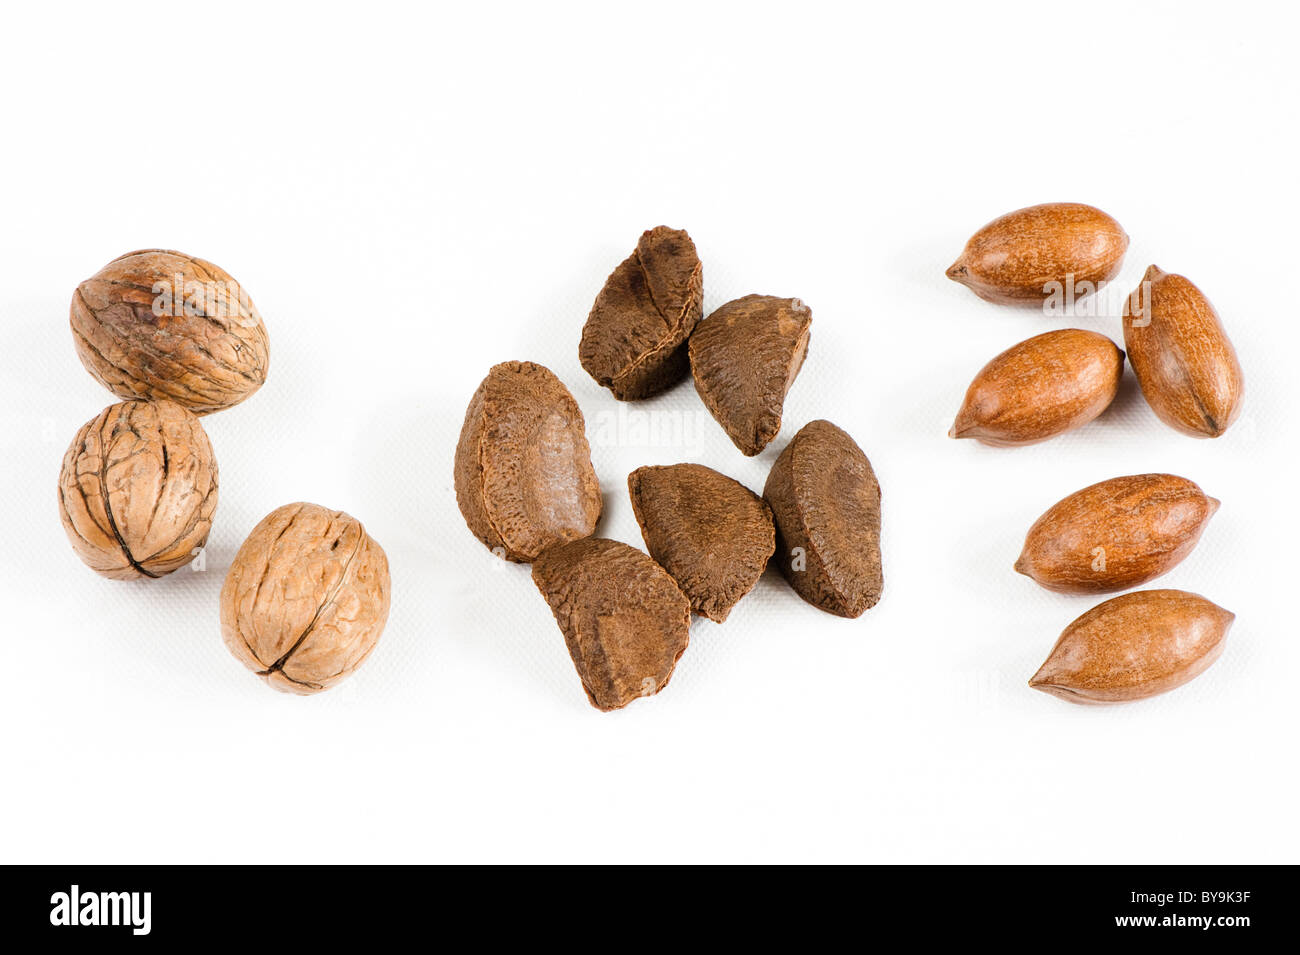 Three walnuts, six brazil nuts and five pecan nuts against a white background Stock Photo